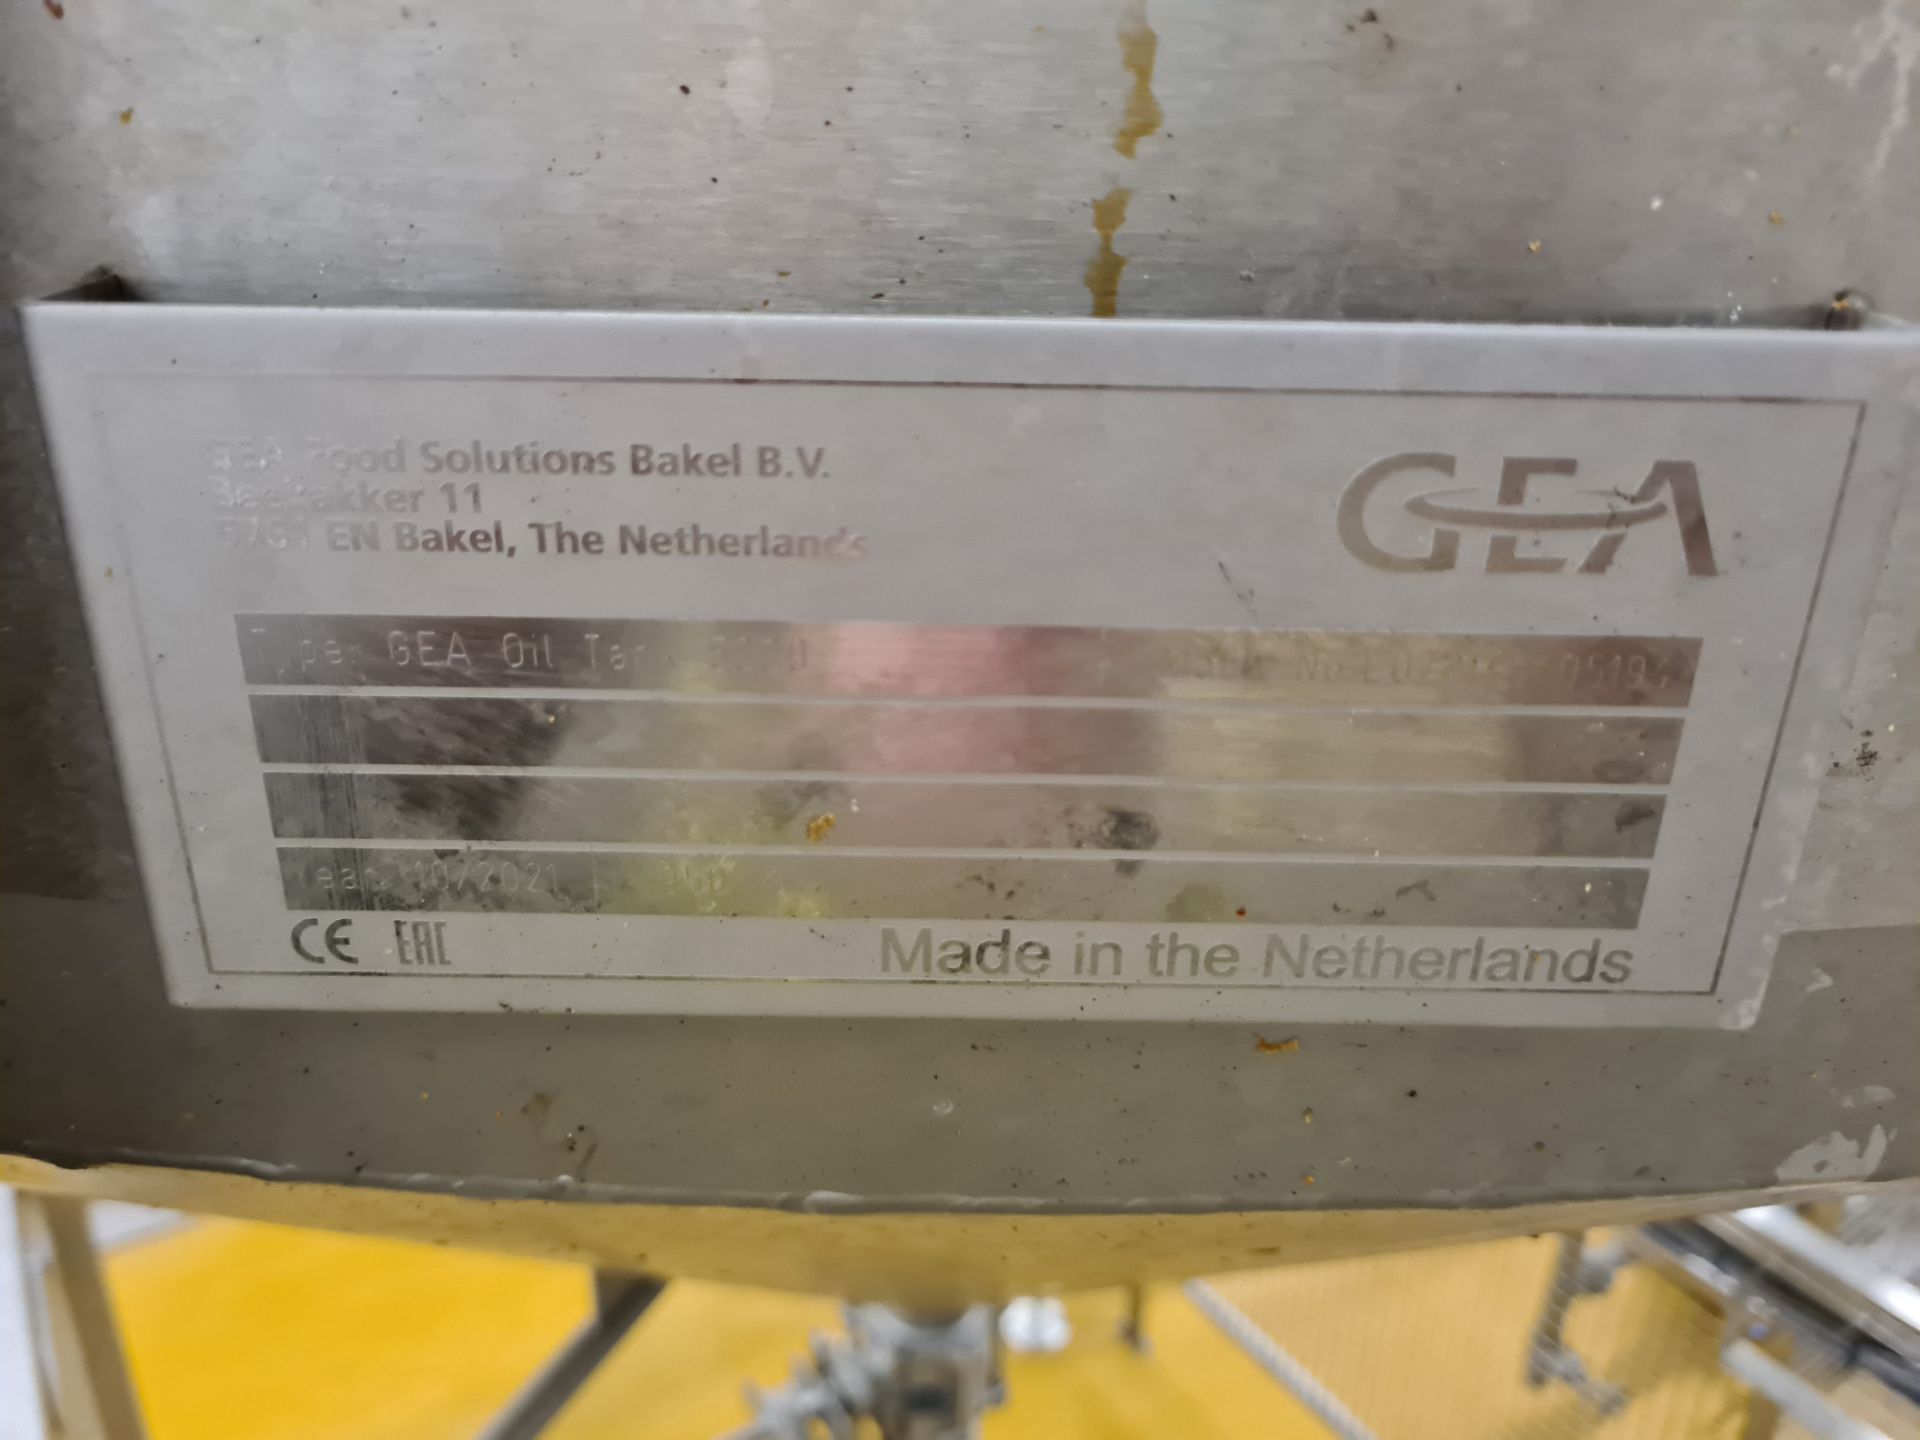 GEA 5000 STAINLESS STEEL OIL TANK, serial no. E022140405194, approx. 1.8m dia., 2.6m deep overall, - Image 5 of 5